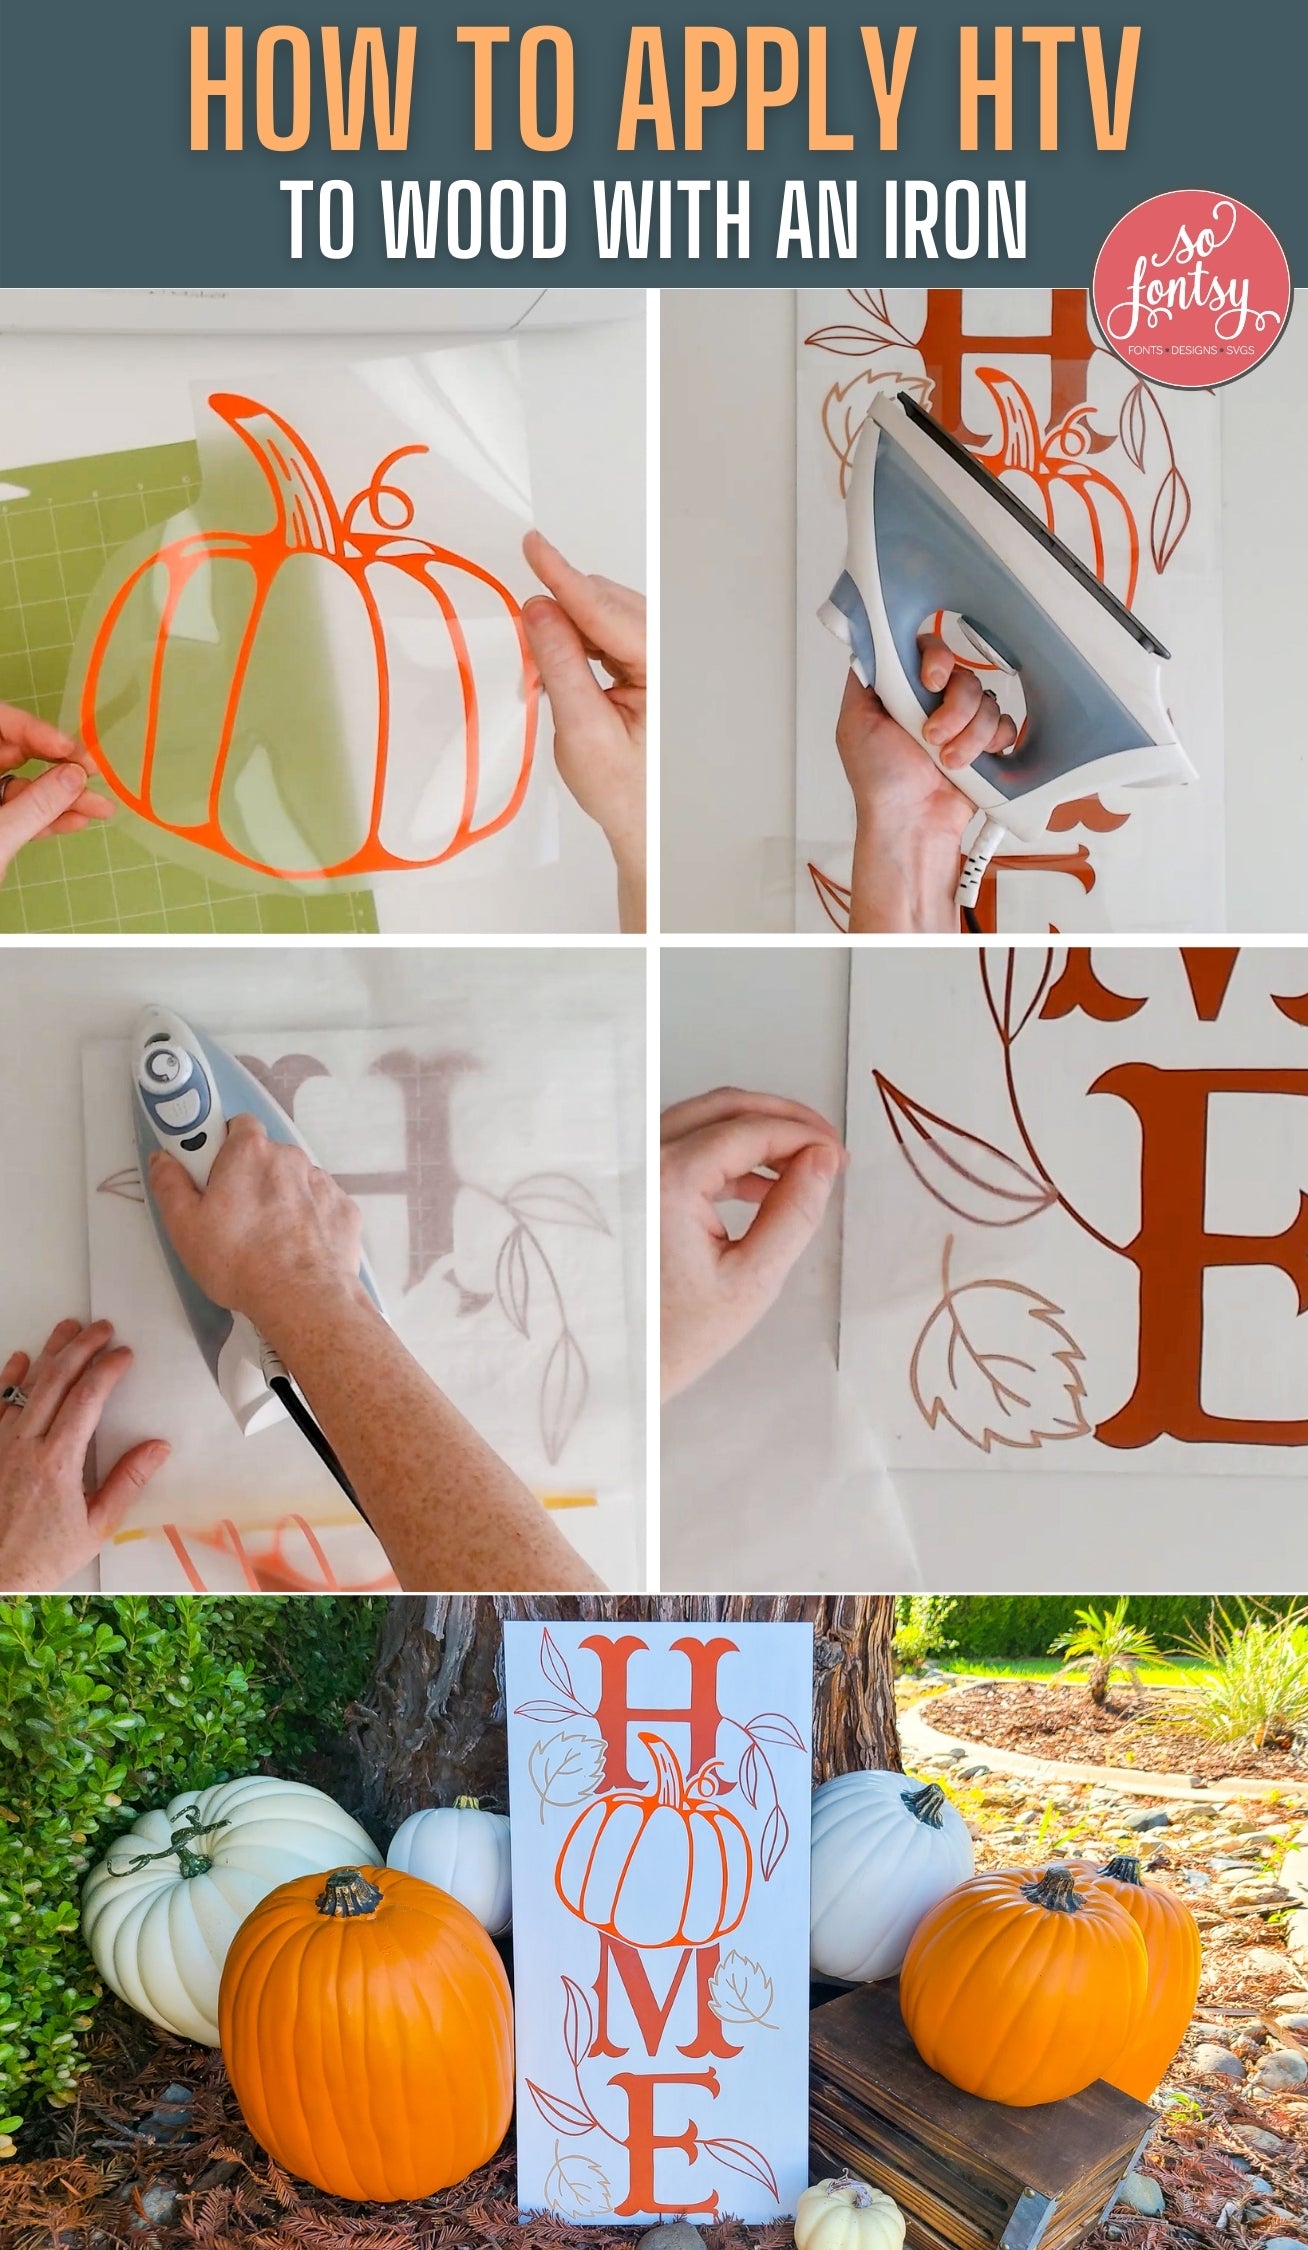 How to Apply HTV to Wood with an Iron - So Fontsy